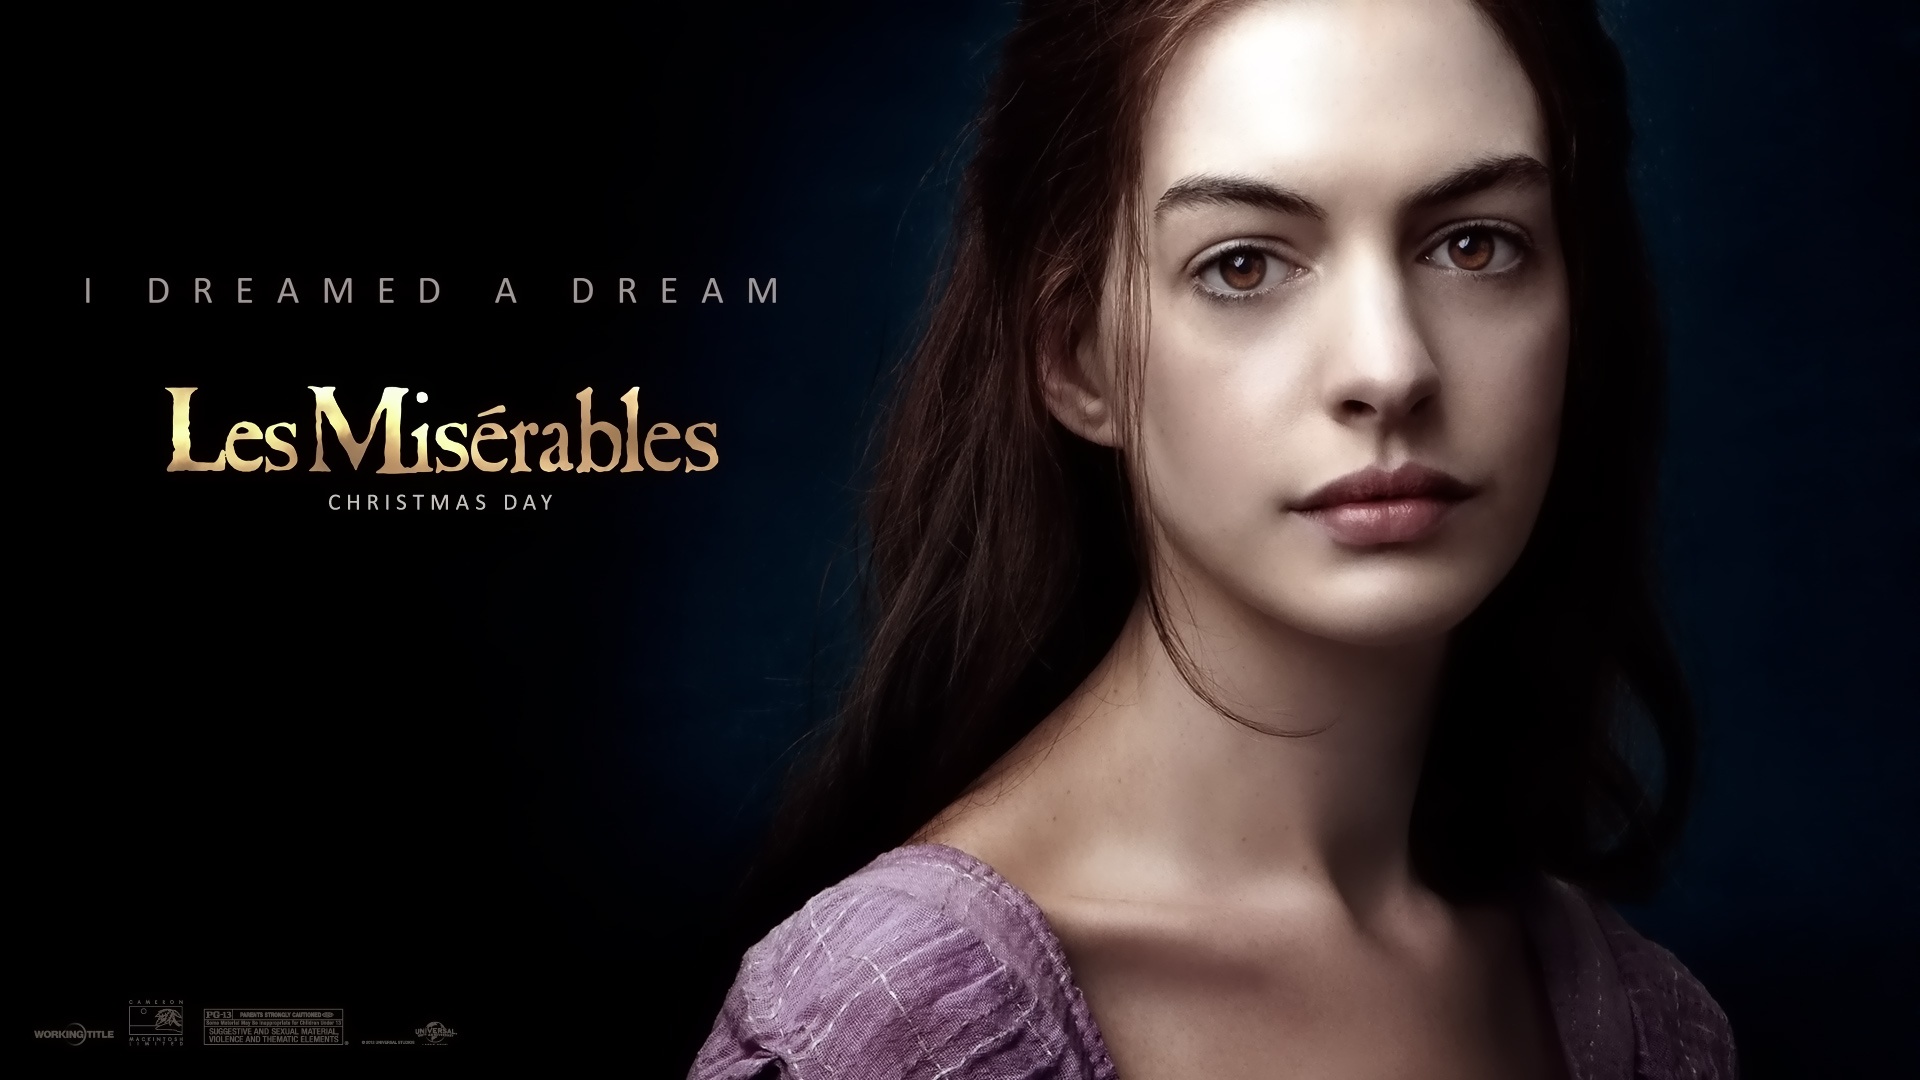 anne-hathaway-in-les-miserables-1920x1080.jpg